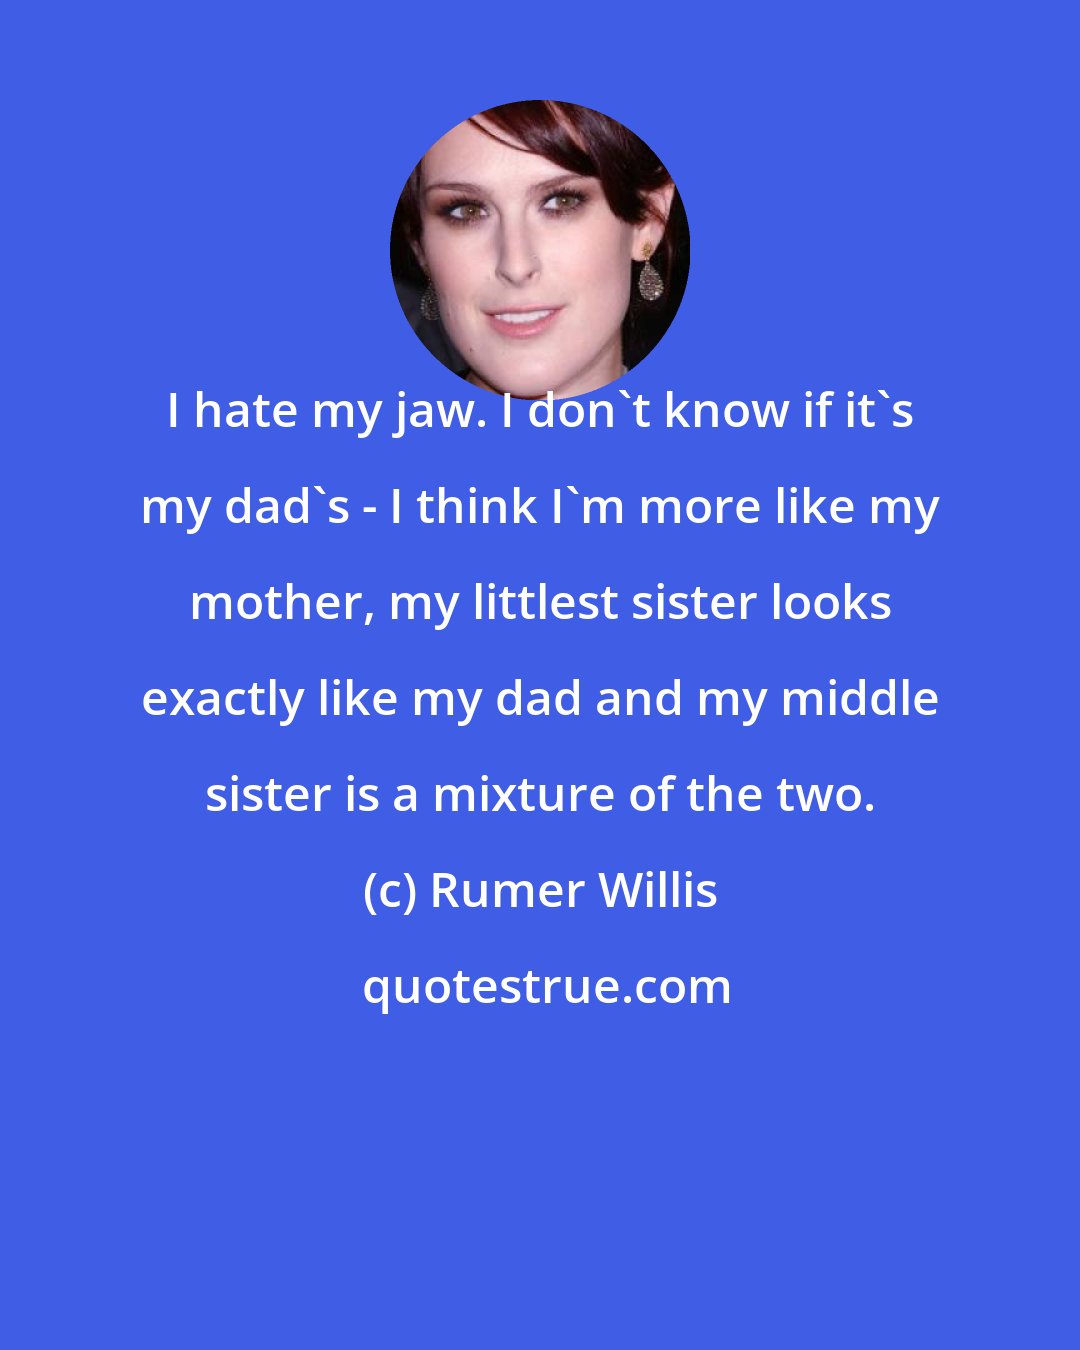 Rumer Willis: I hate my jaw. I don't know if it's my dad's - I think I'm more like my mother, my littlest sister looks exactly like my dad and my middle sister is a mixture of the two.